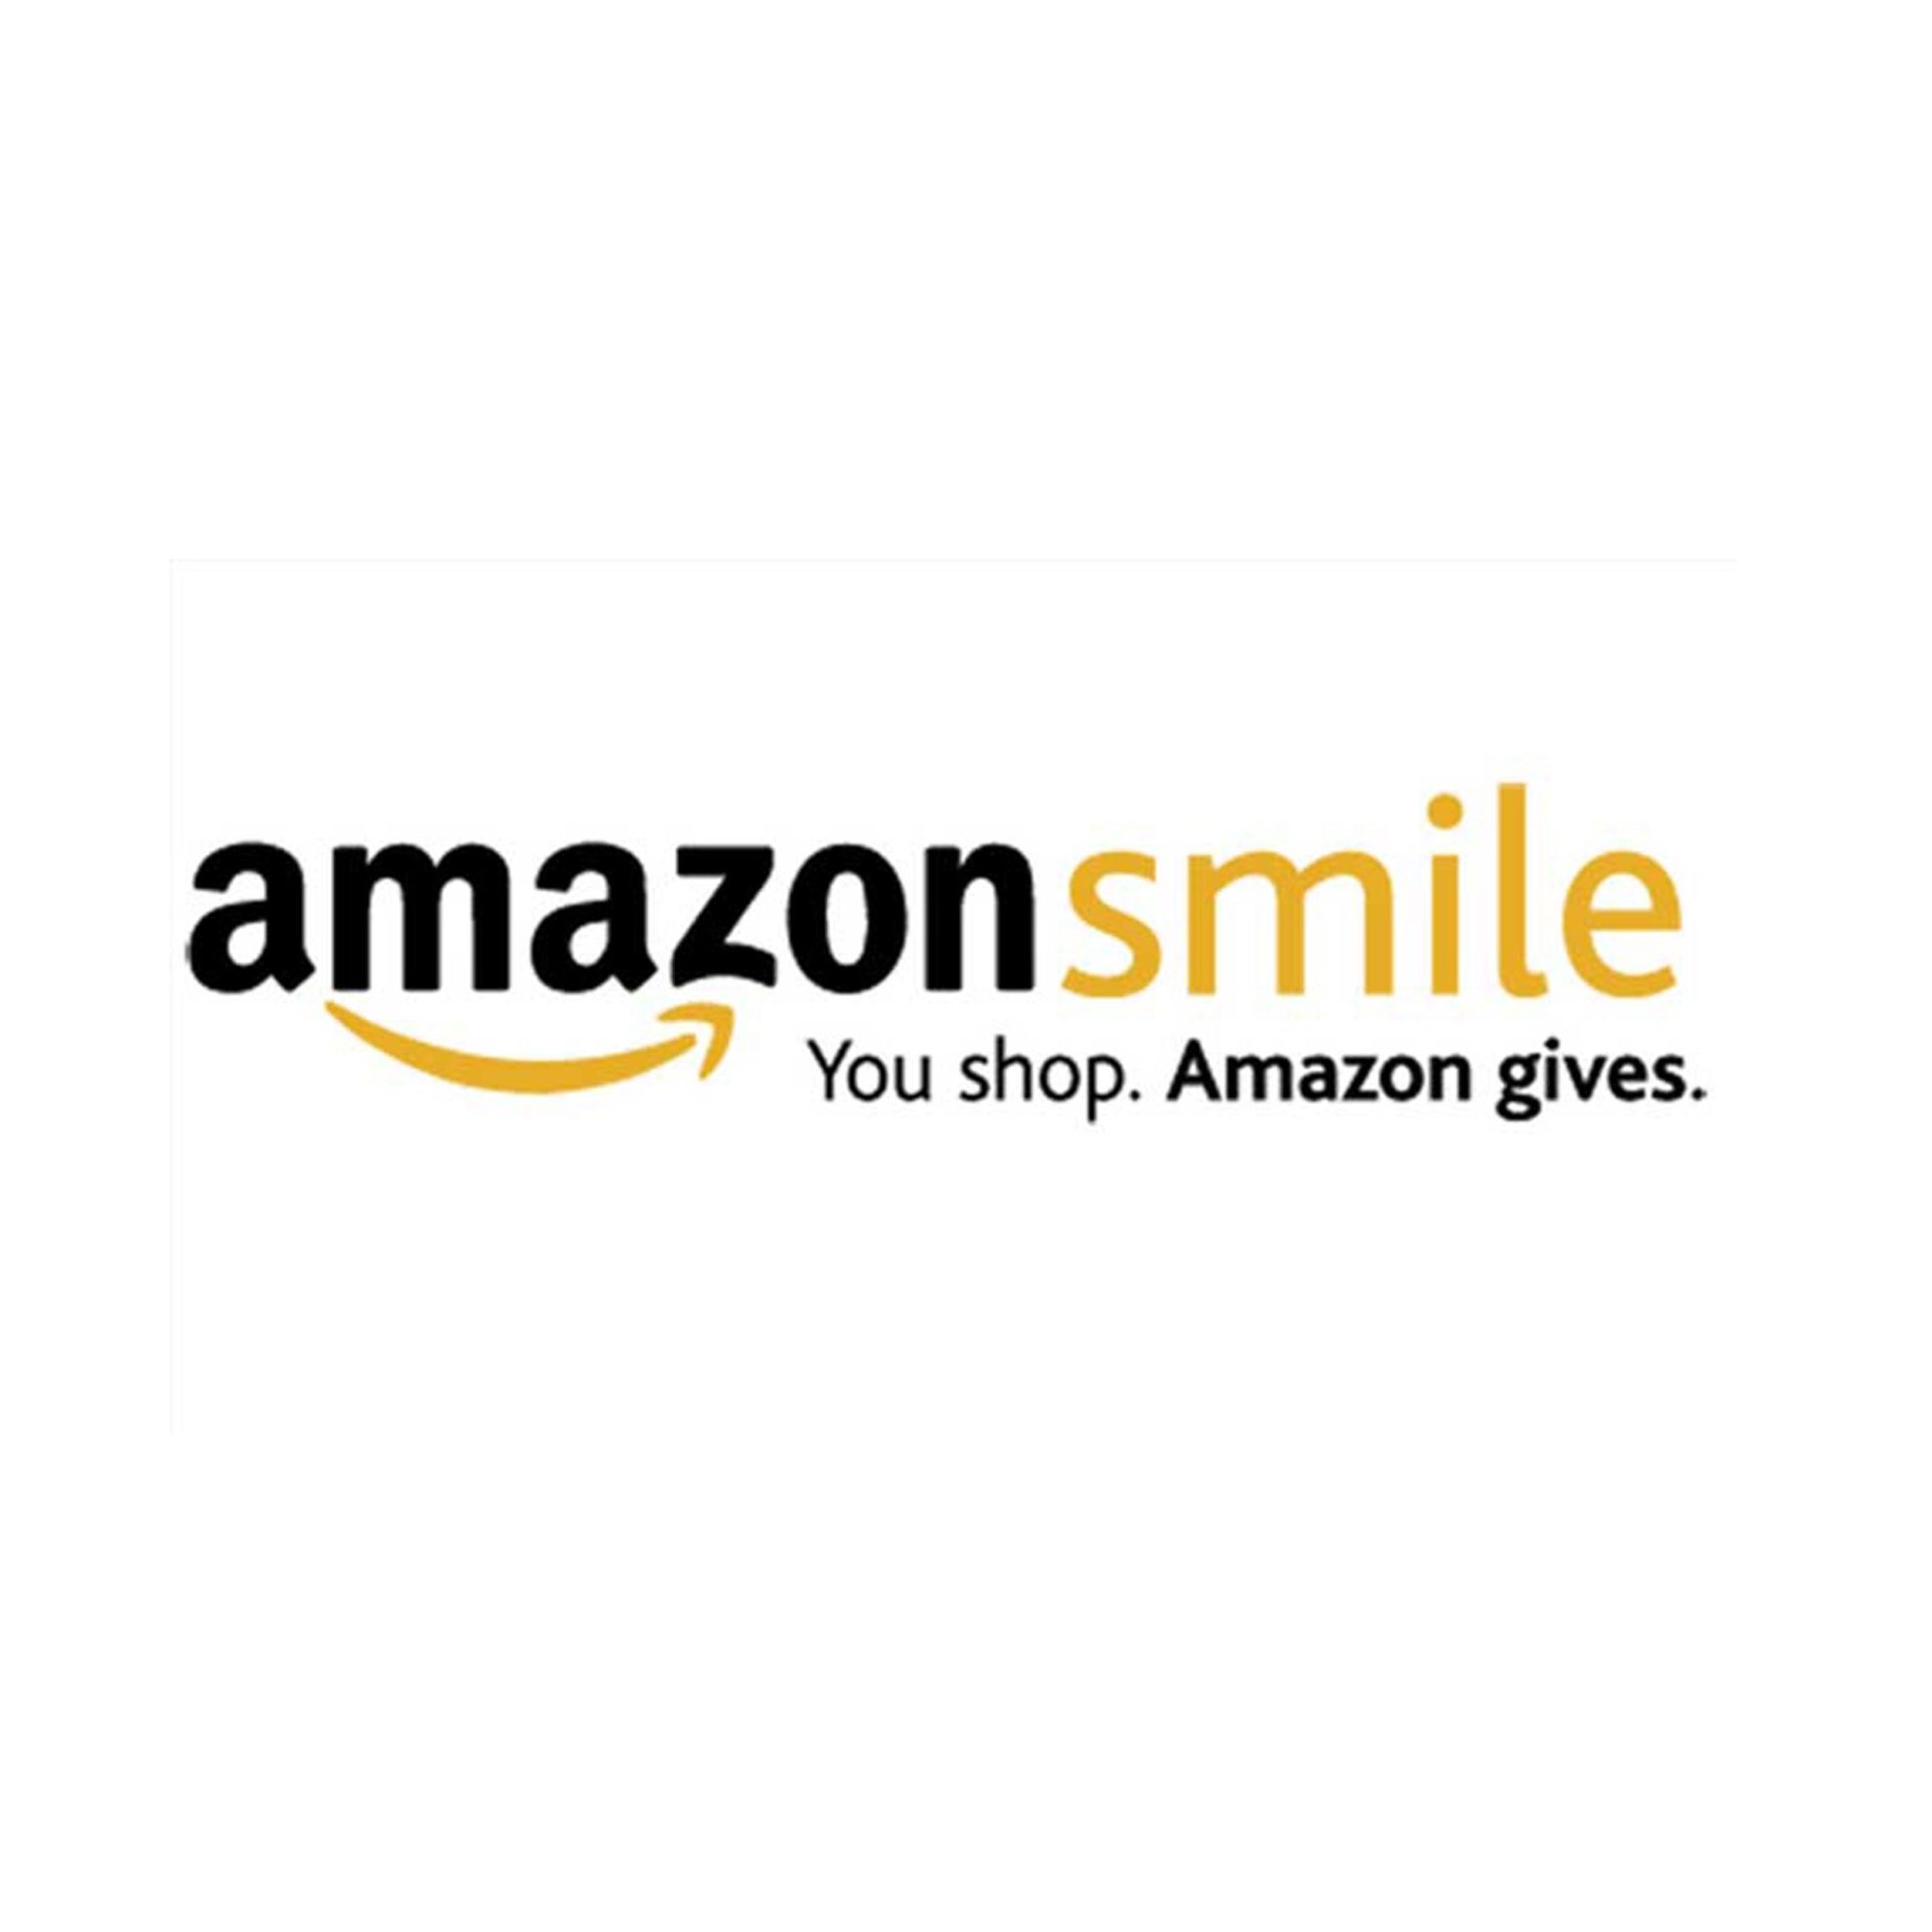 amazon-smile-donation-rookery-bray-research-reserve-two-round